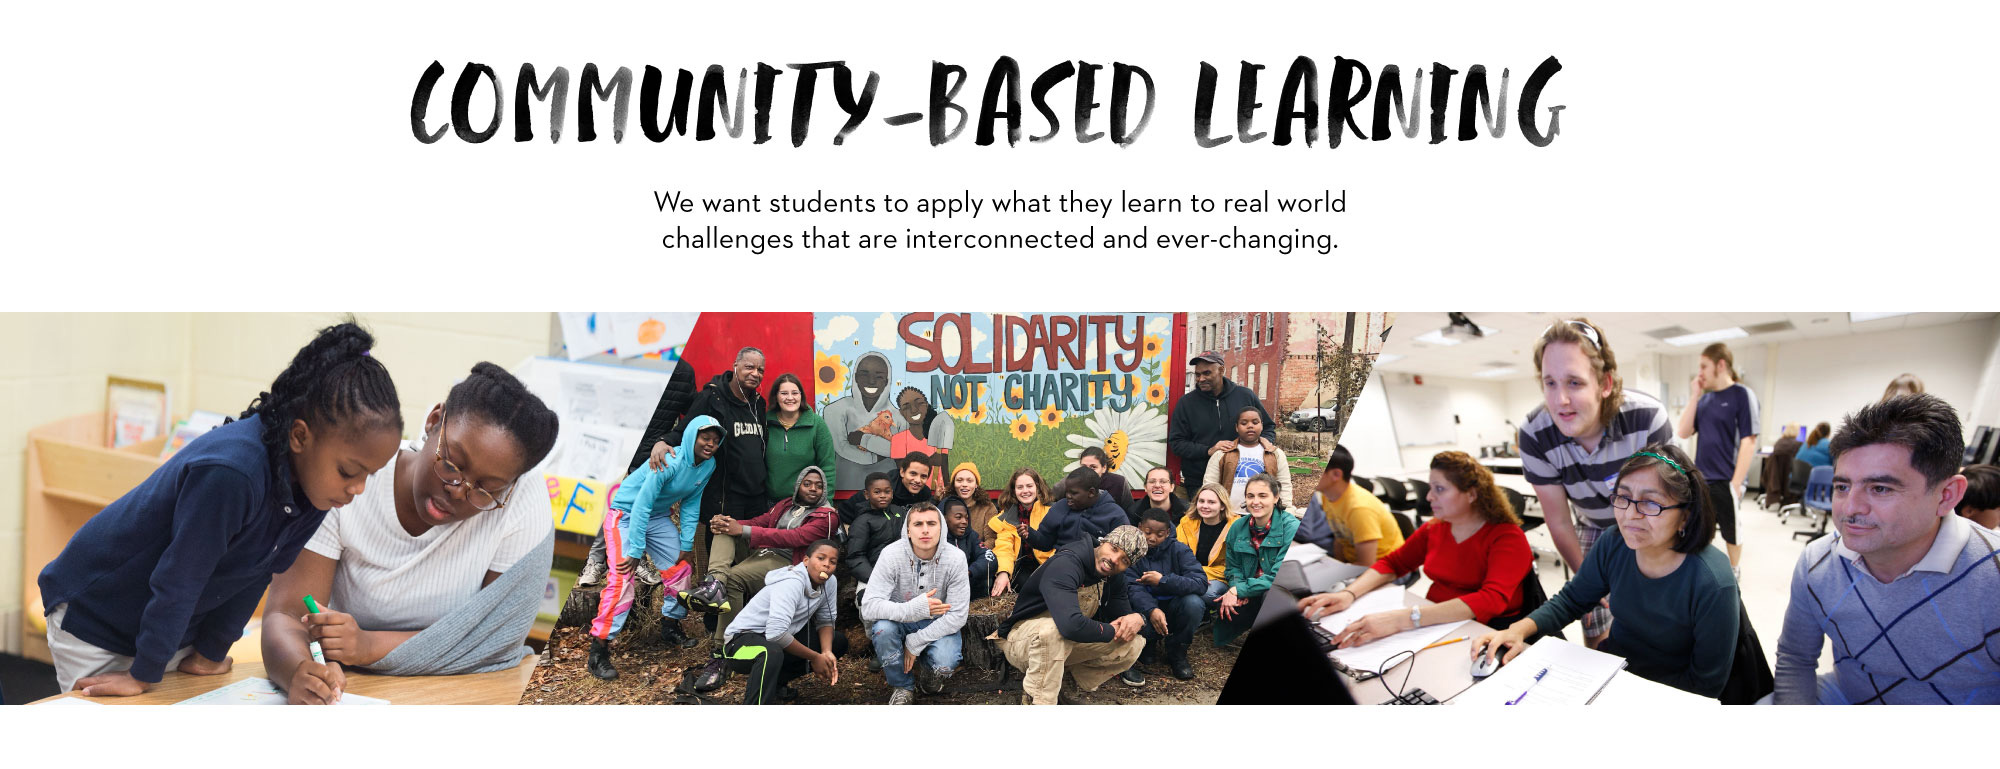 Community based learing - we want students to apply what they learn to real world challenges that are interconnected and ever-changing